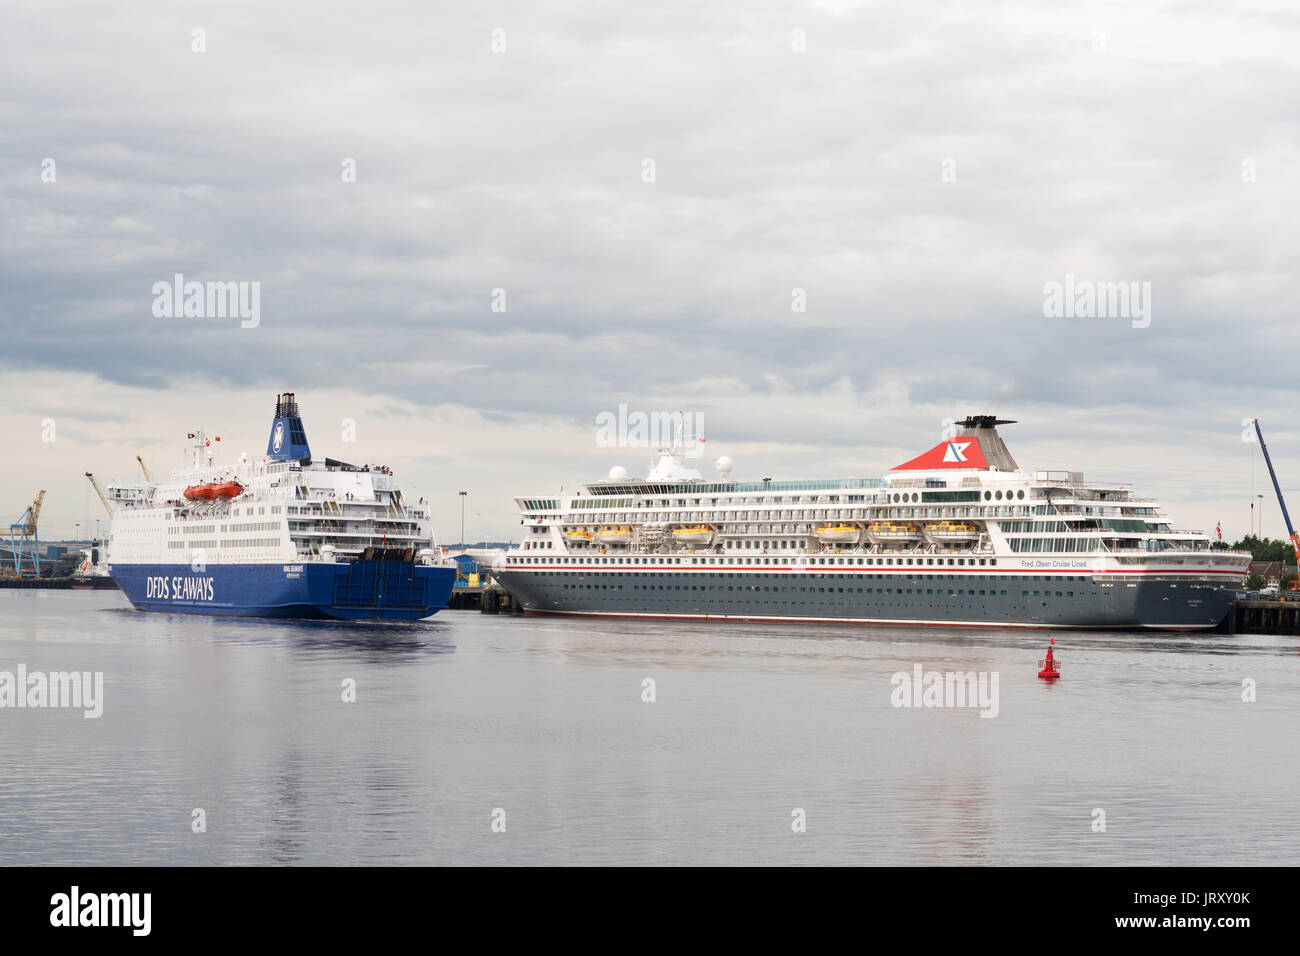 DFDS ferry King Seaways passes Fred Olsen cruise ship Balmoral moored at the Port of Tyne, North Shields, England, UK Stock Photo